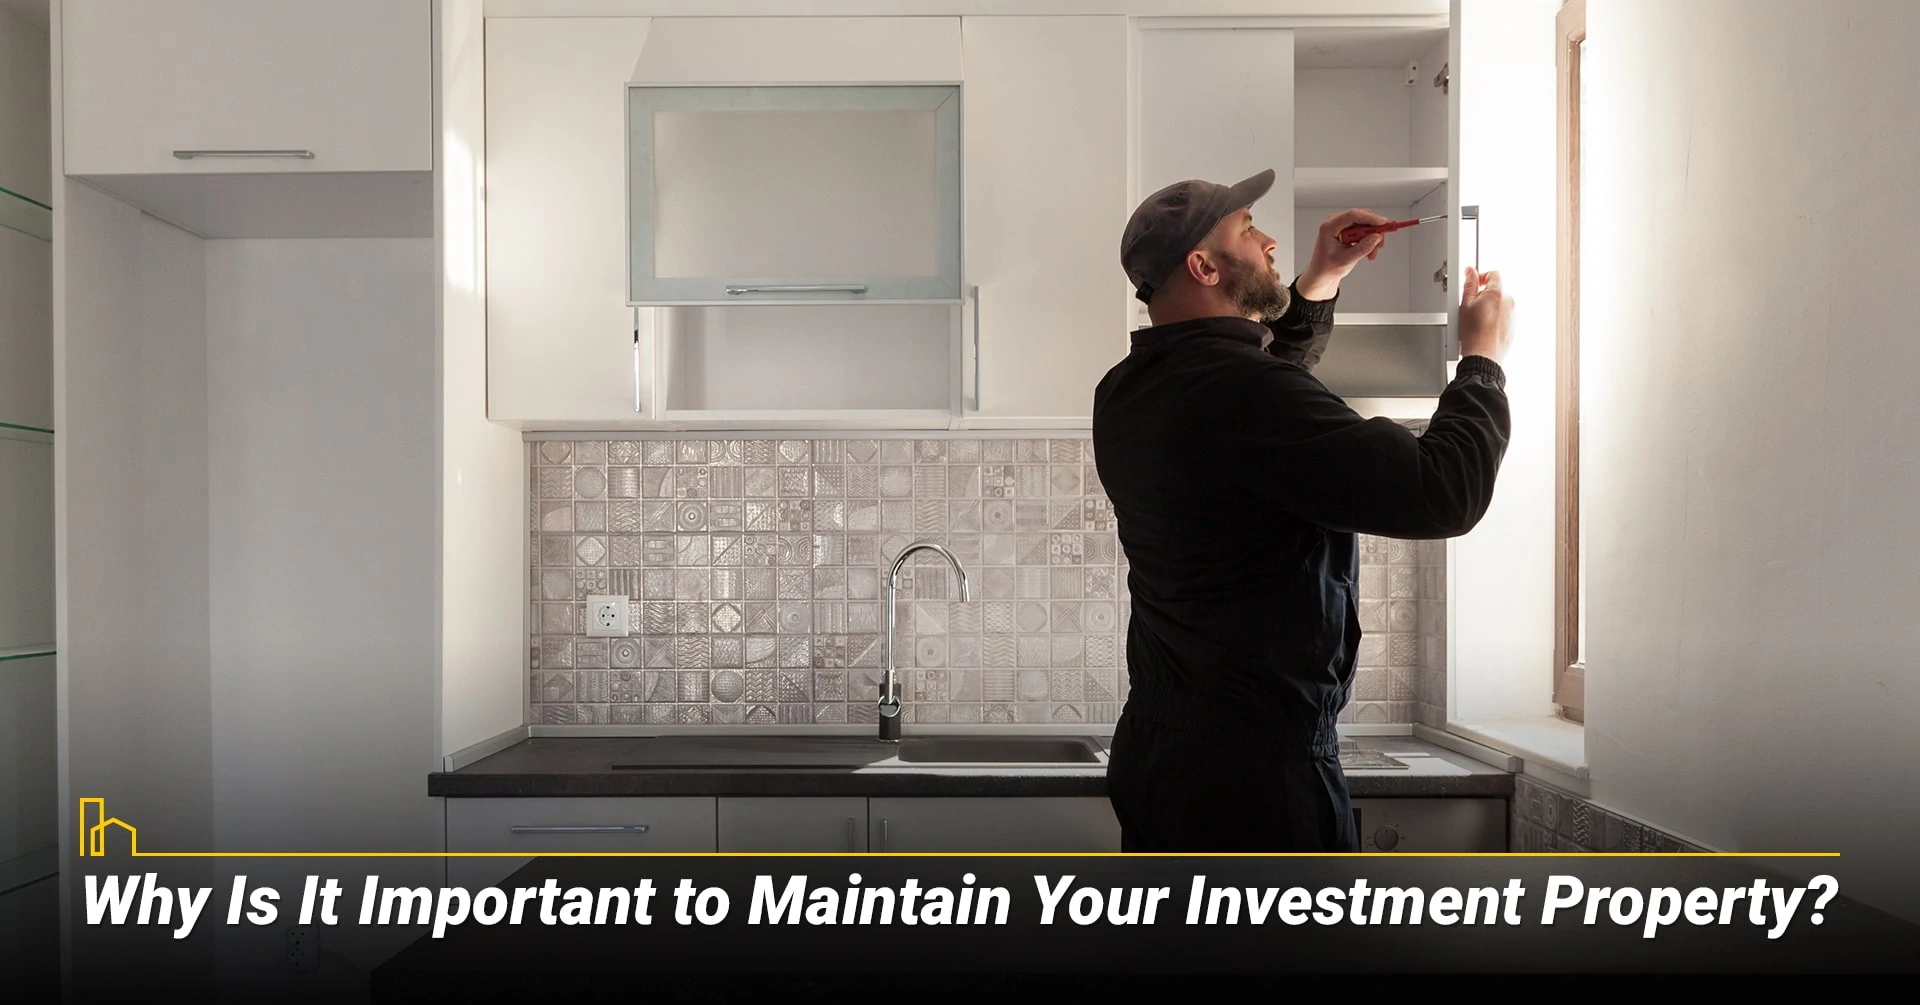 Why Is It Important to Maintain Your Investment Property? Reasons to maintain your investment property